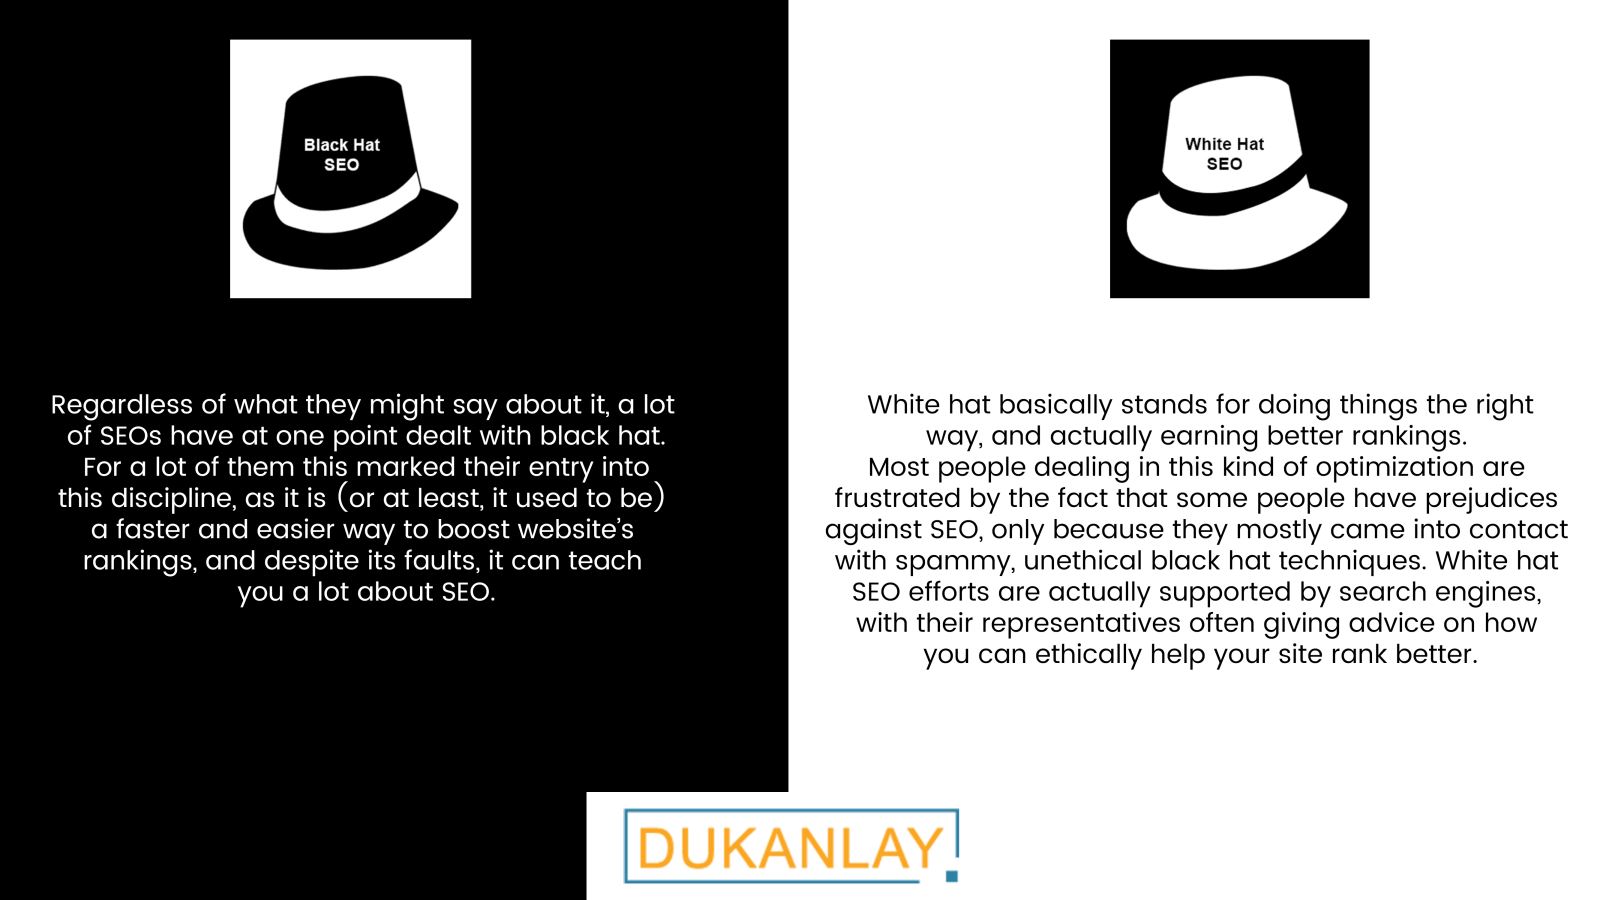 Difference between Black Hat and White Hat SEO